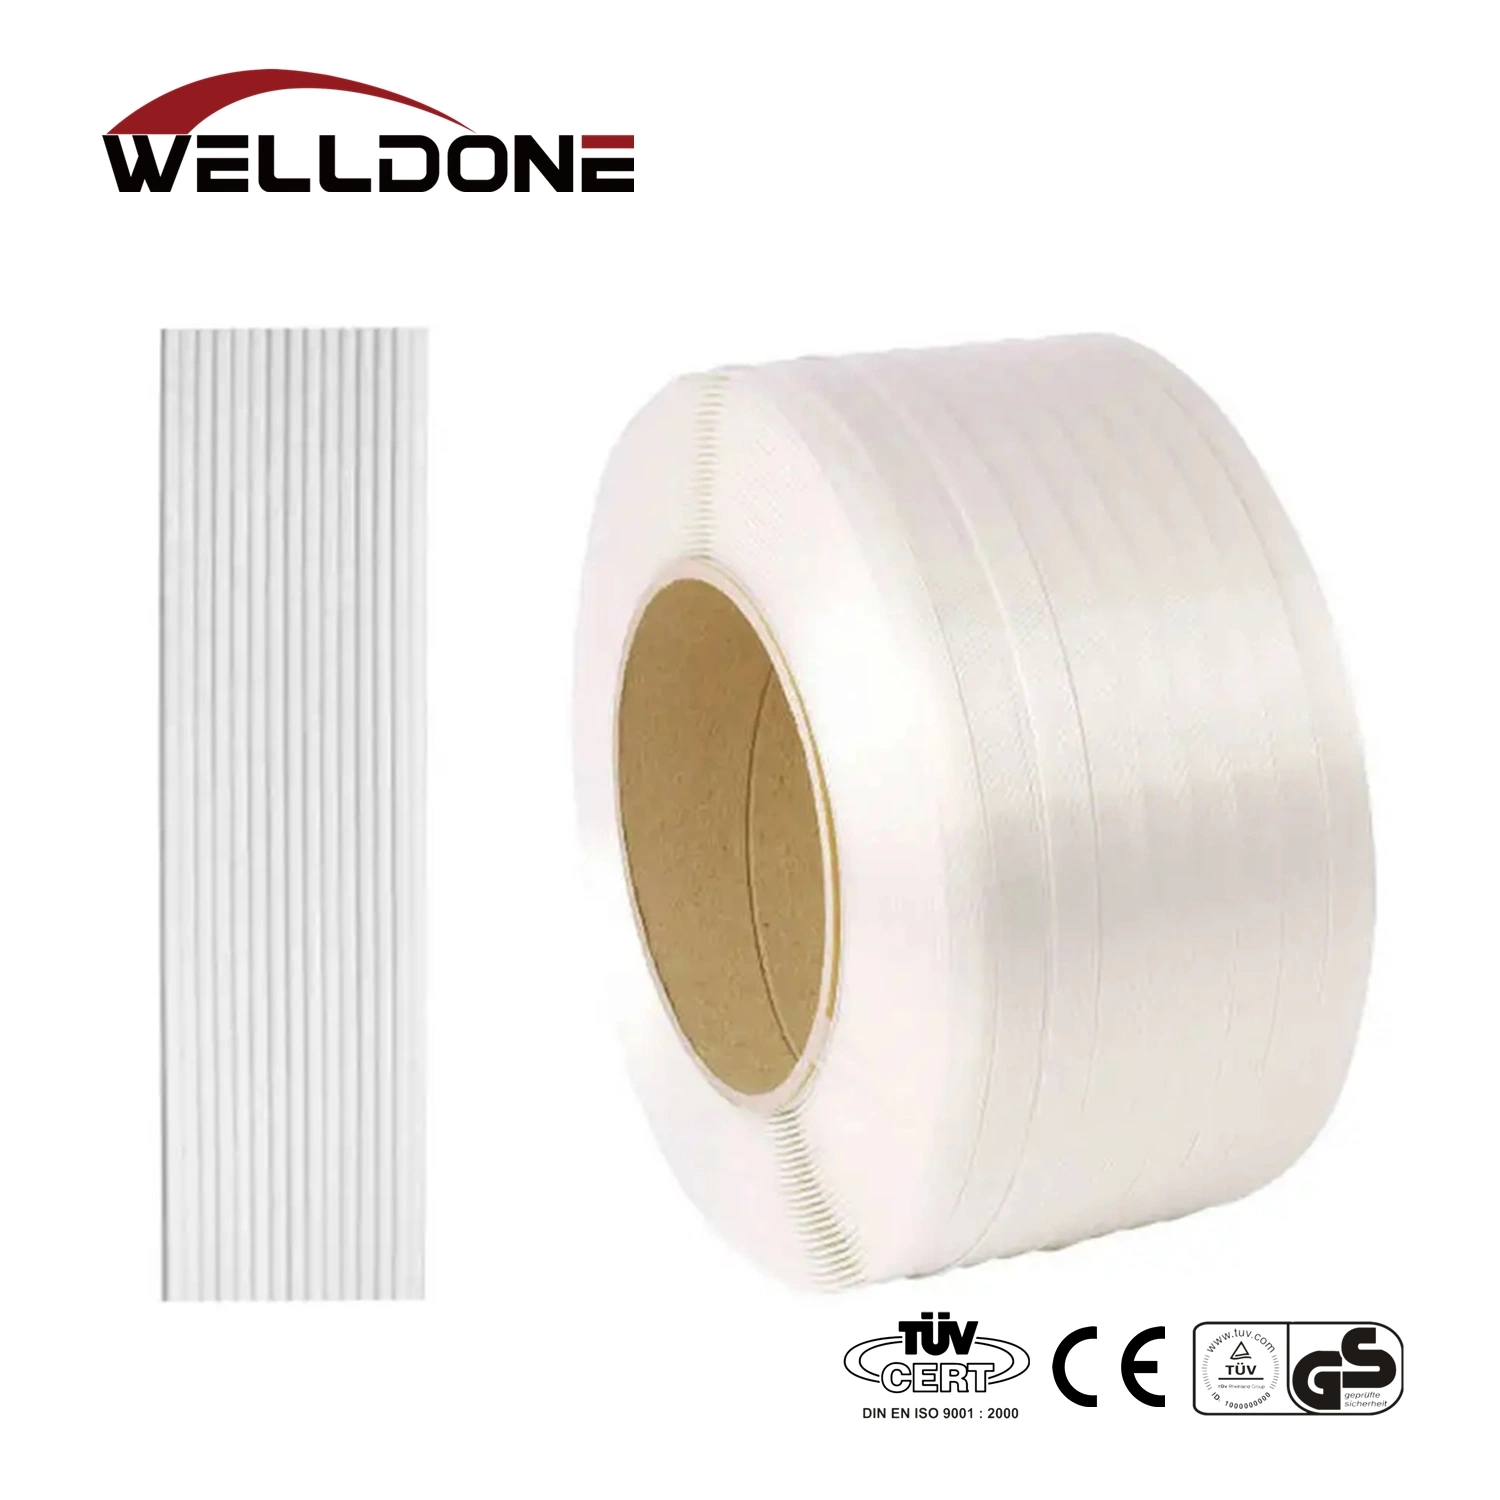 25mm Polyester Composite Cord Strapping